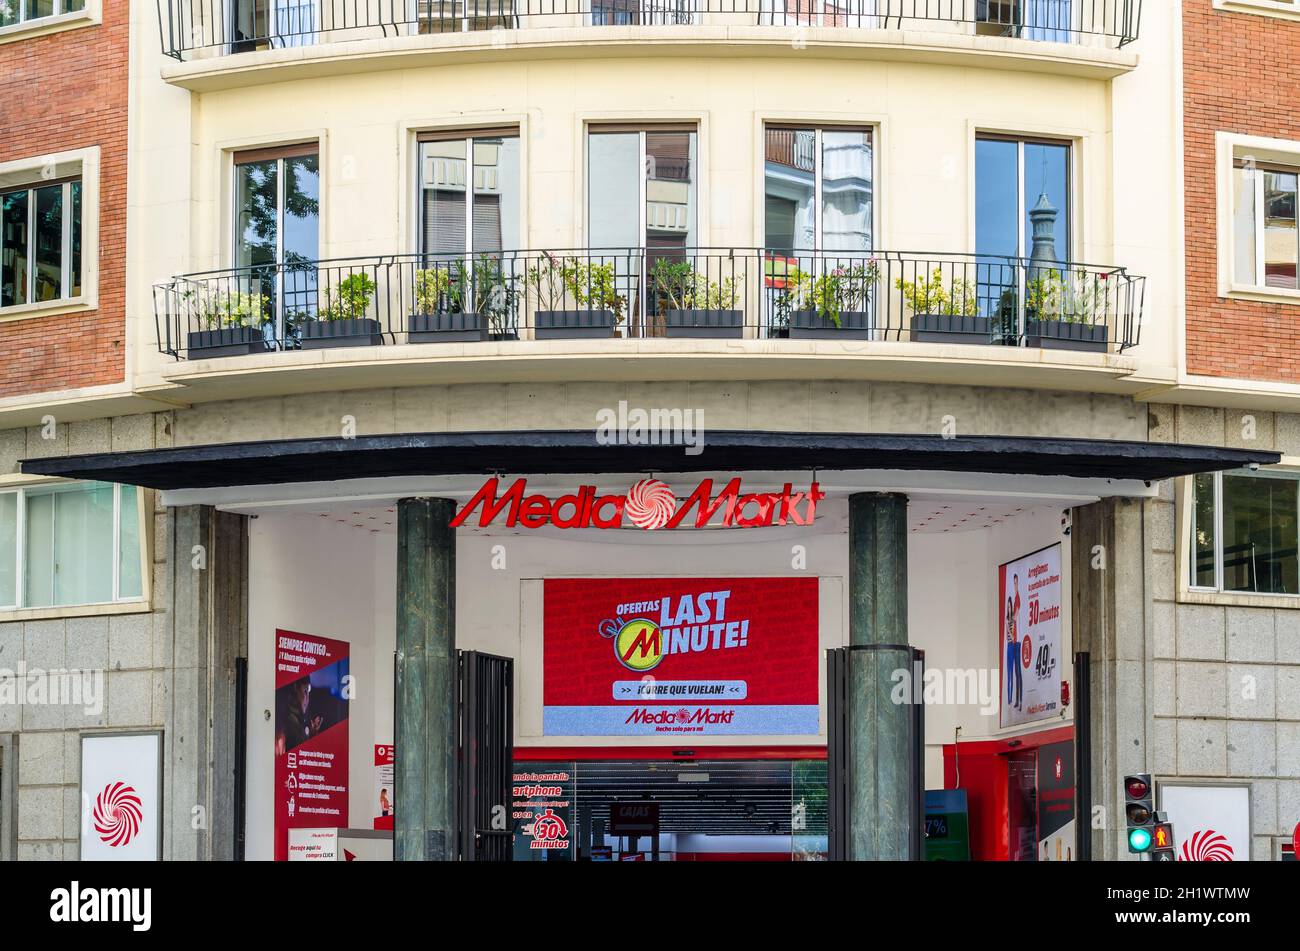 MADRID, SPAIN - JULY 23, 2021: Facade of a Media Markt store in Madrid, Spain. Media Markt is a chain of stores selling consumer electronics Stock Photo